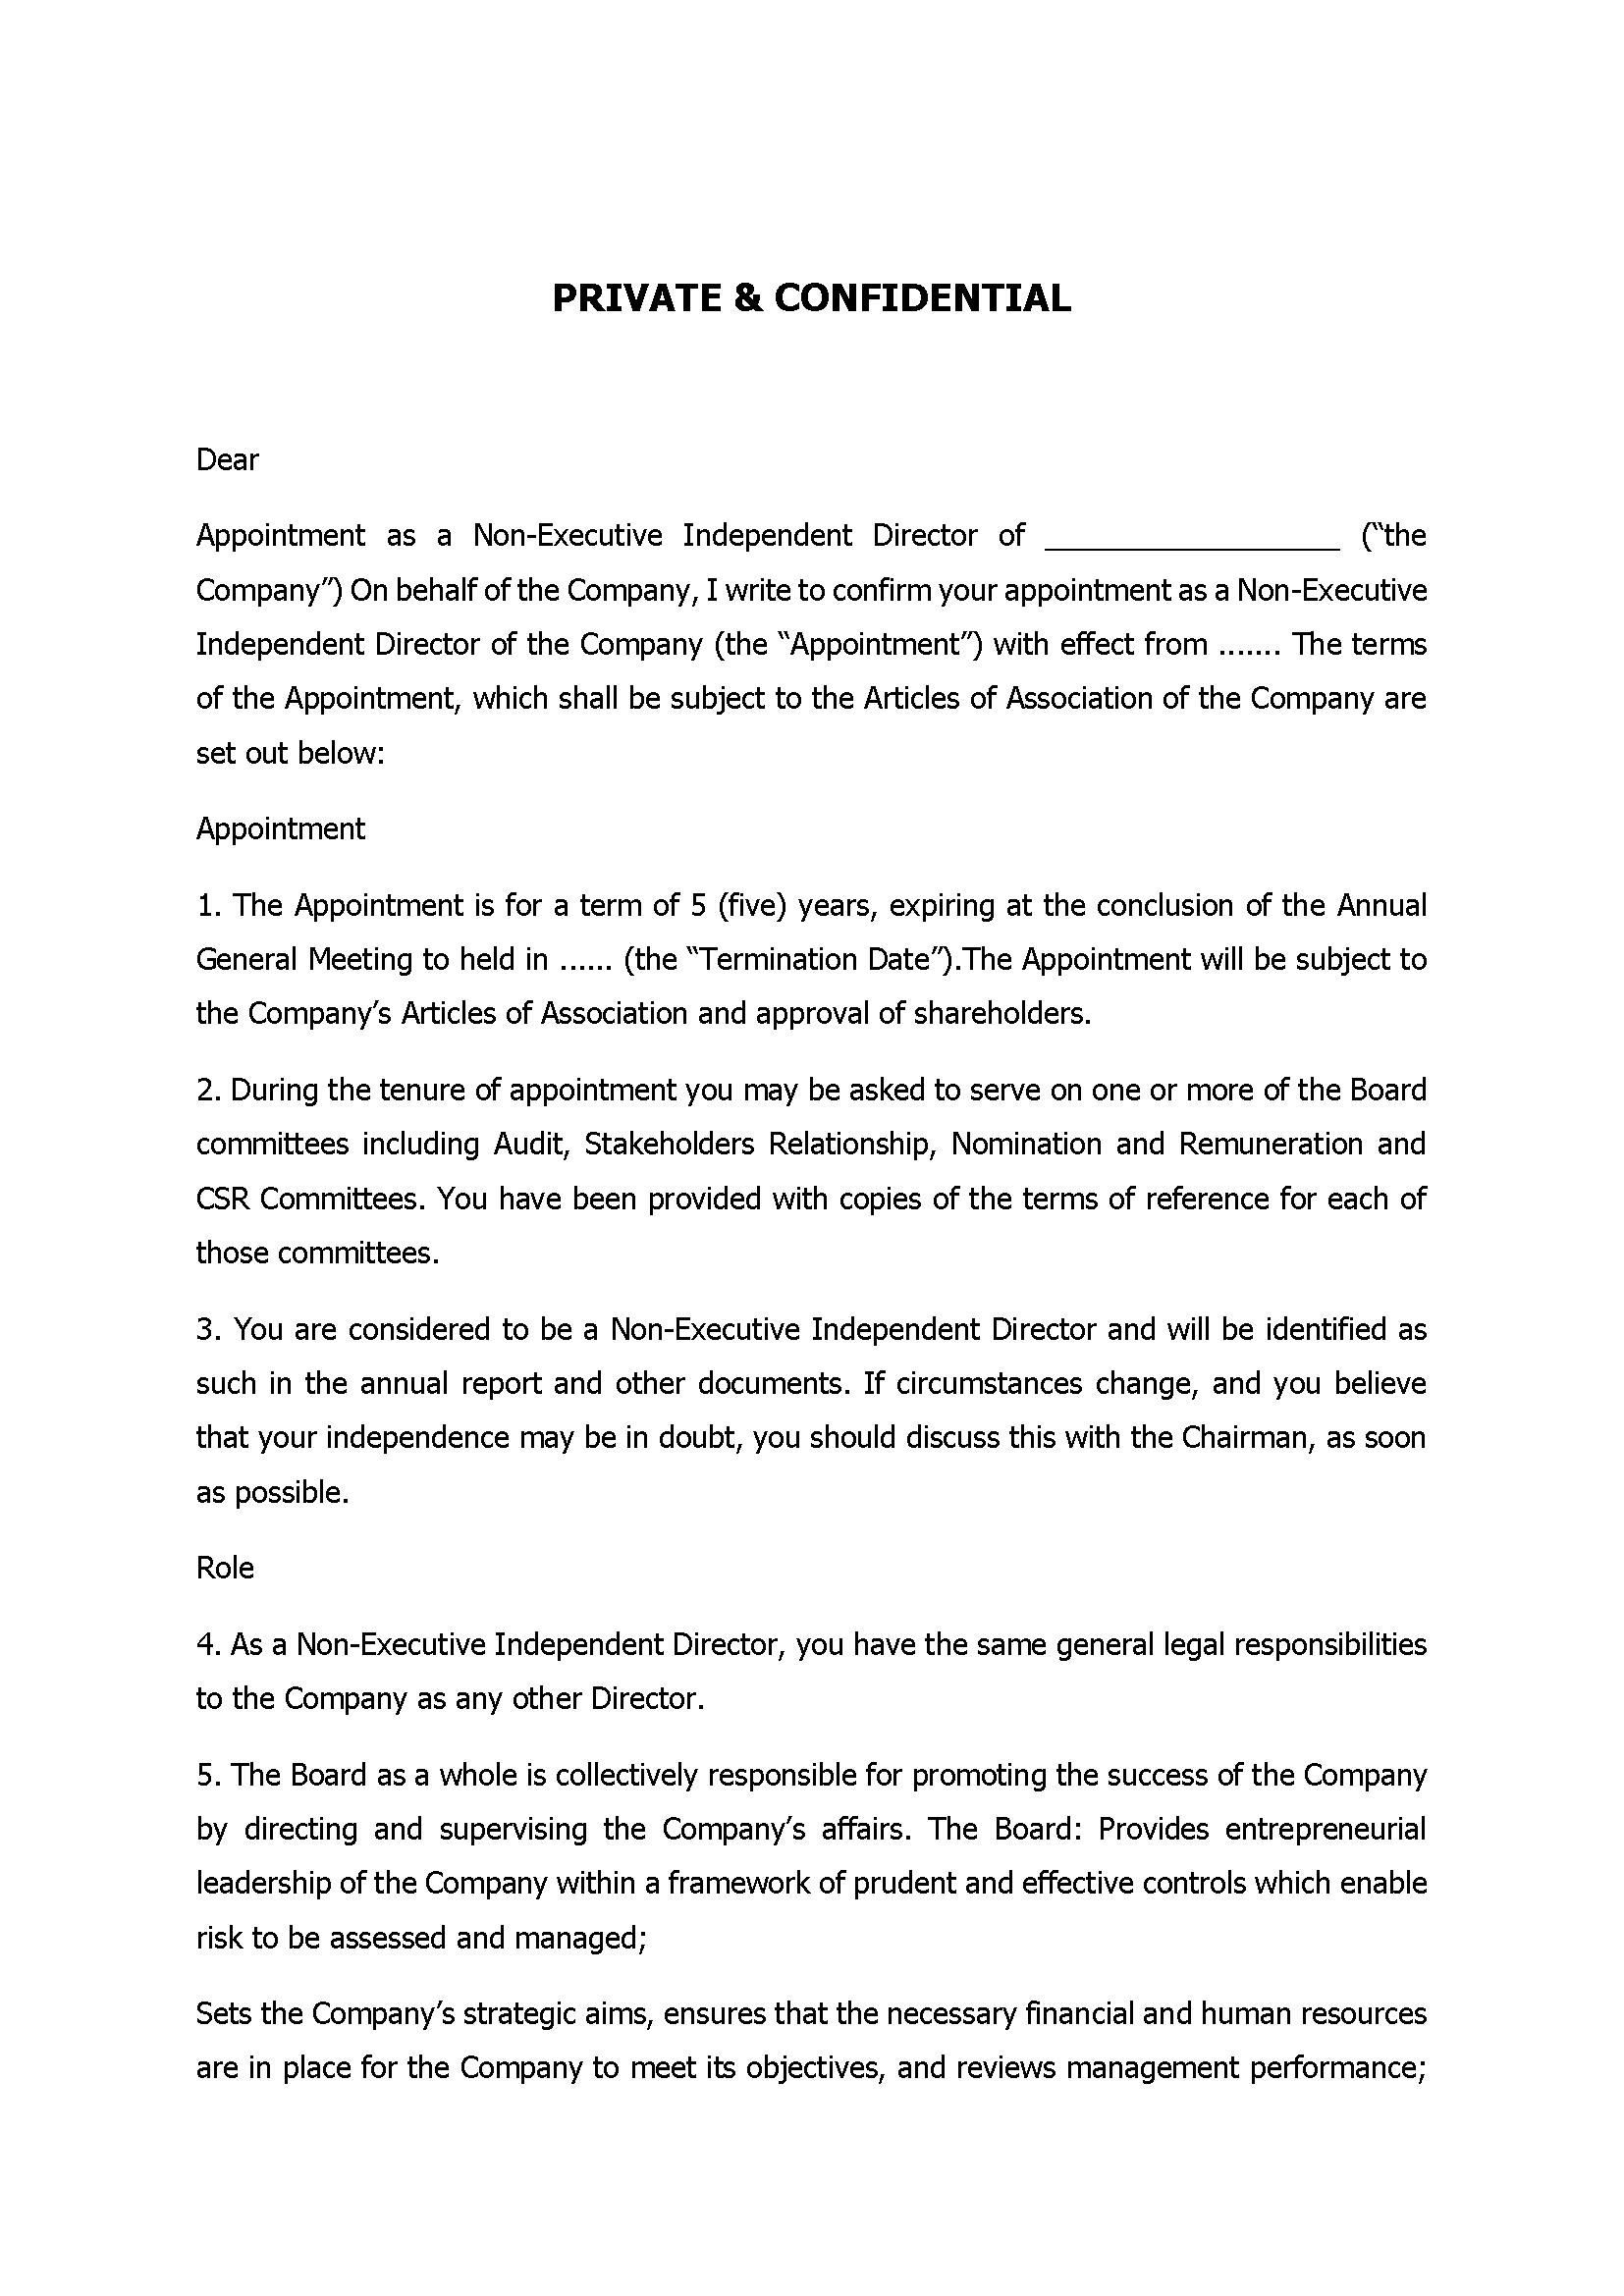 Appointment Letter For Non-Executive Independent Director